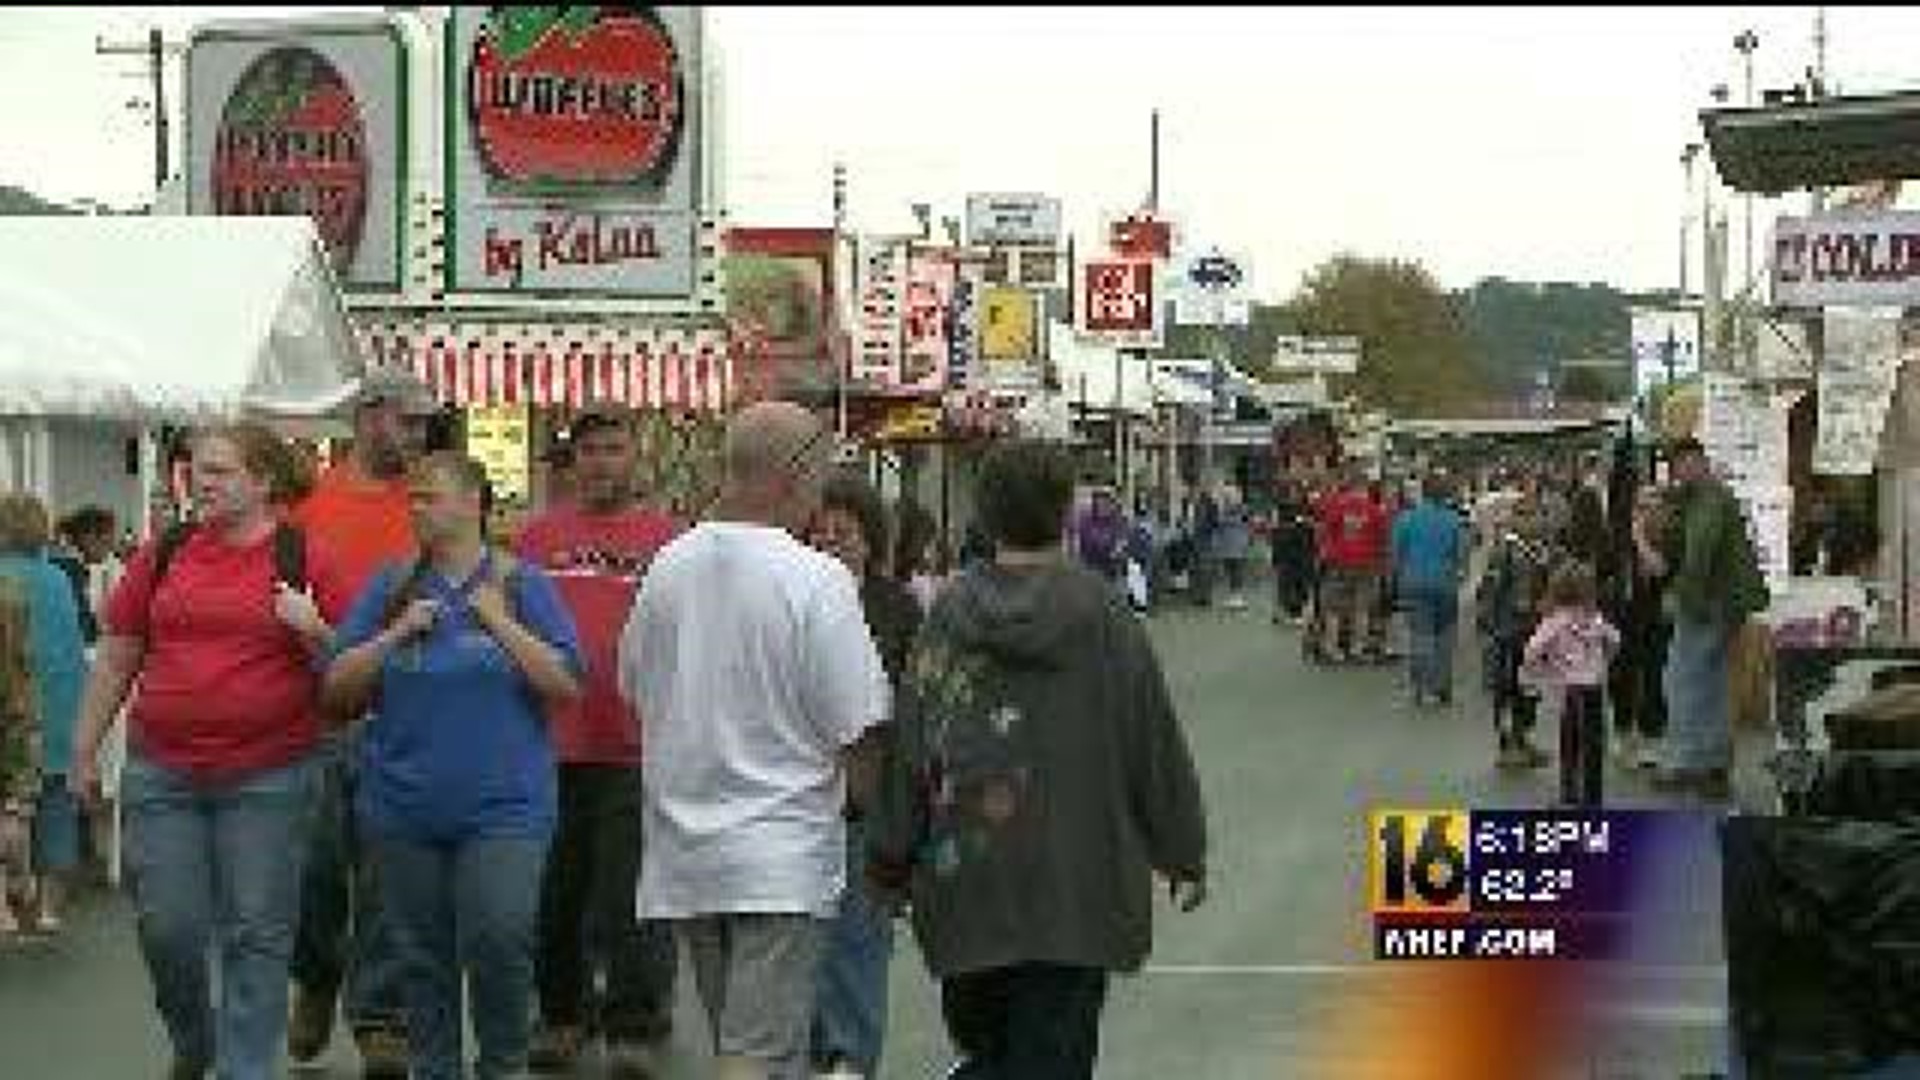 Big Year for the Bloomsburg Fair